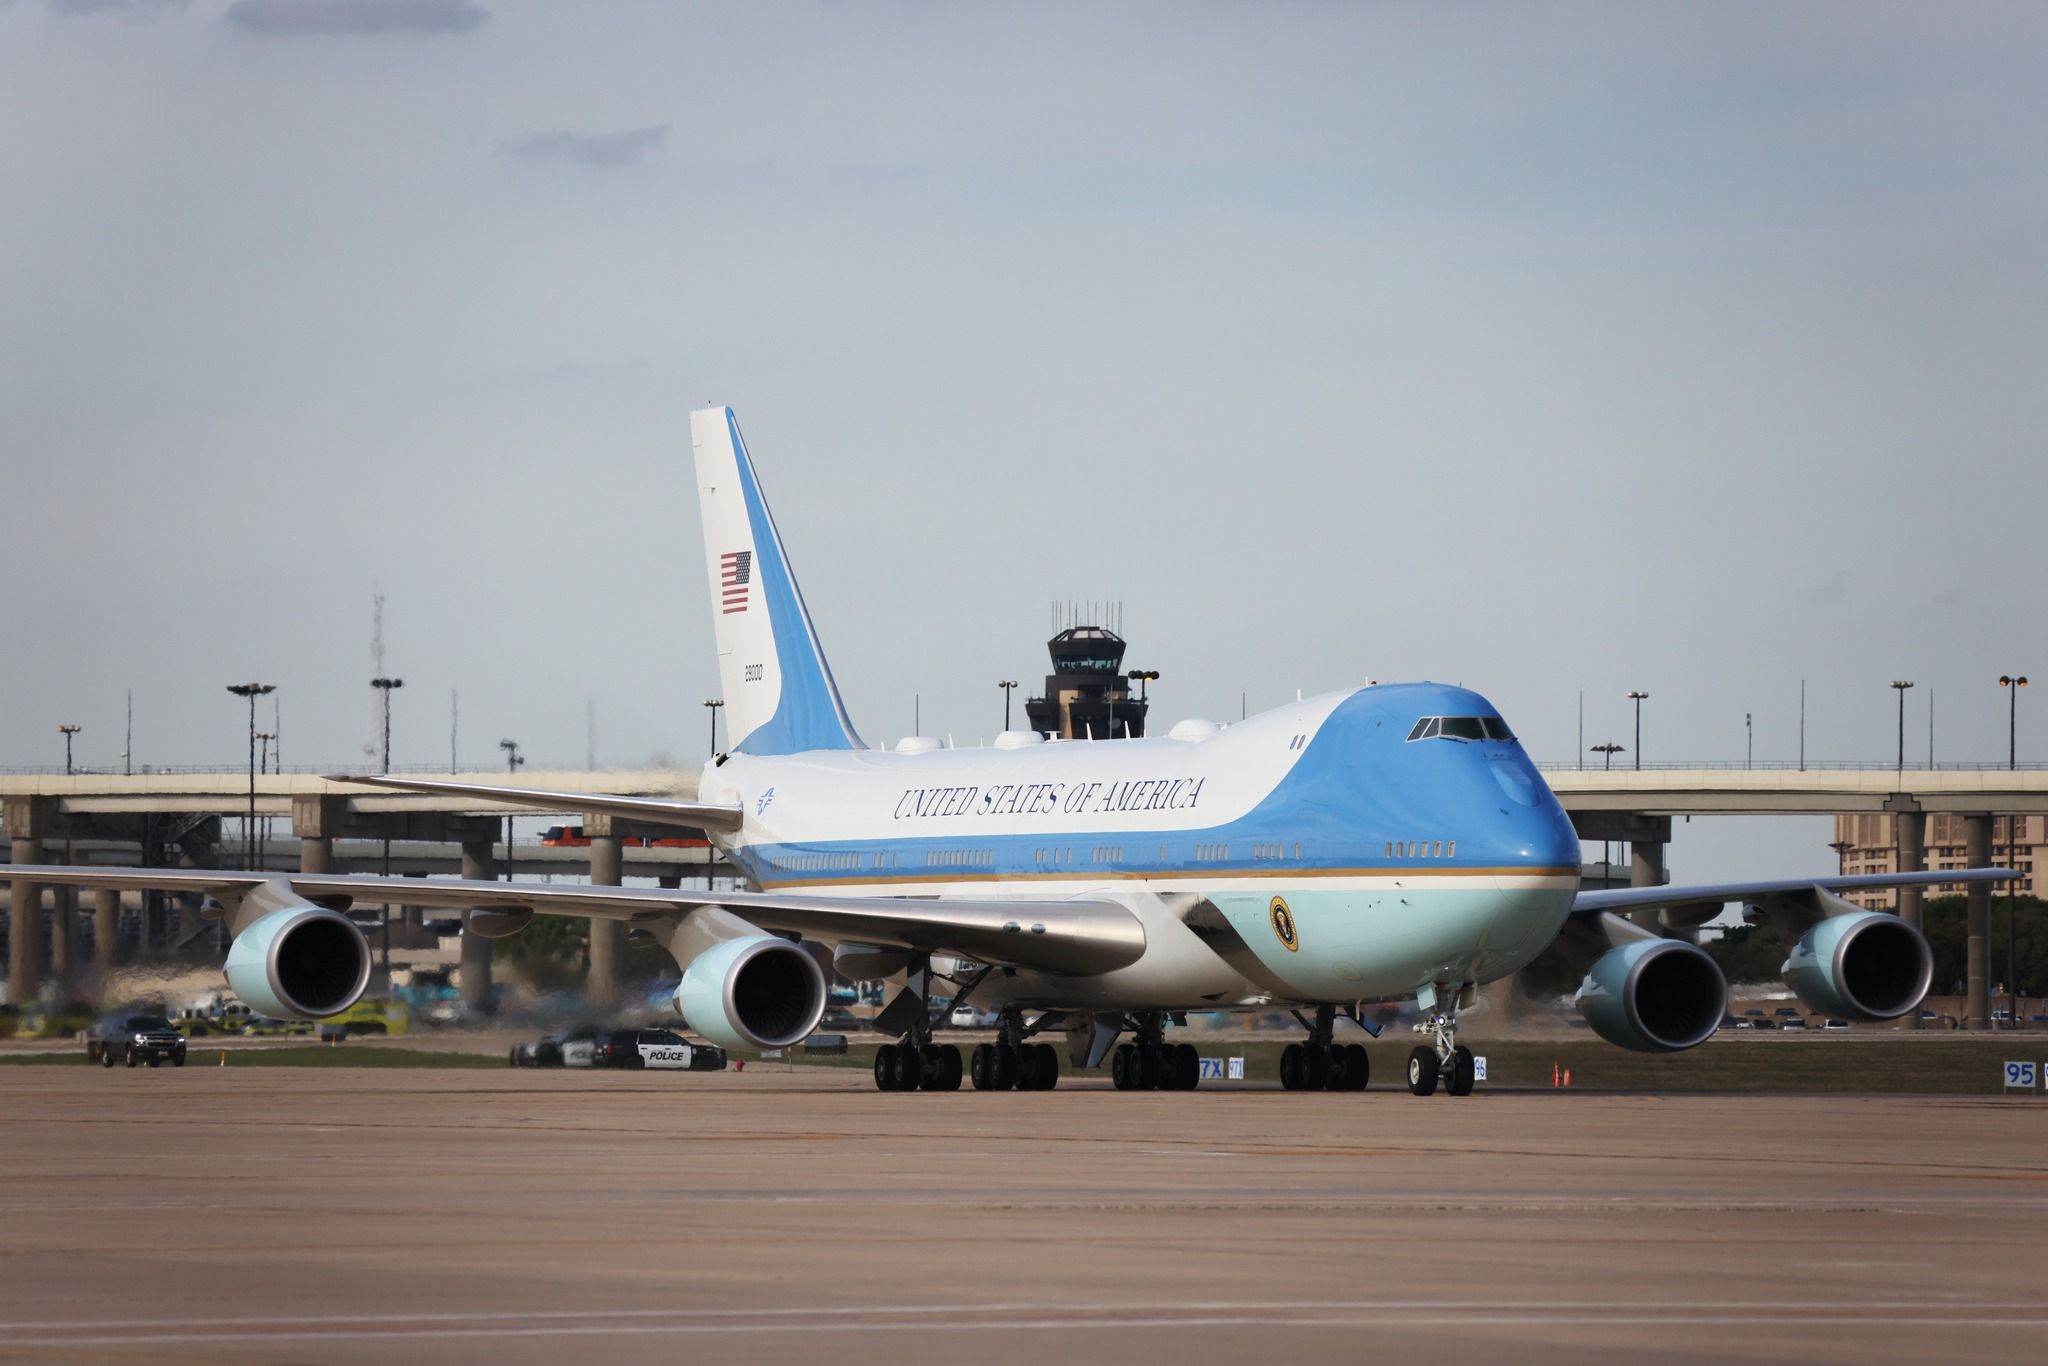 Air Force One Lands at Dallas Fort Worth International Airport